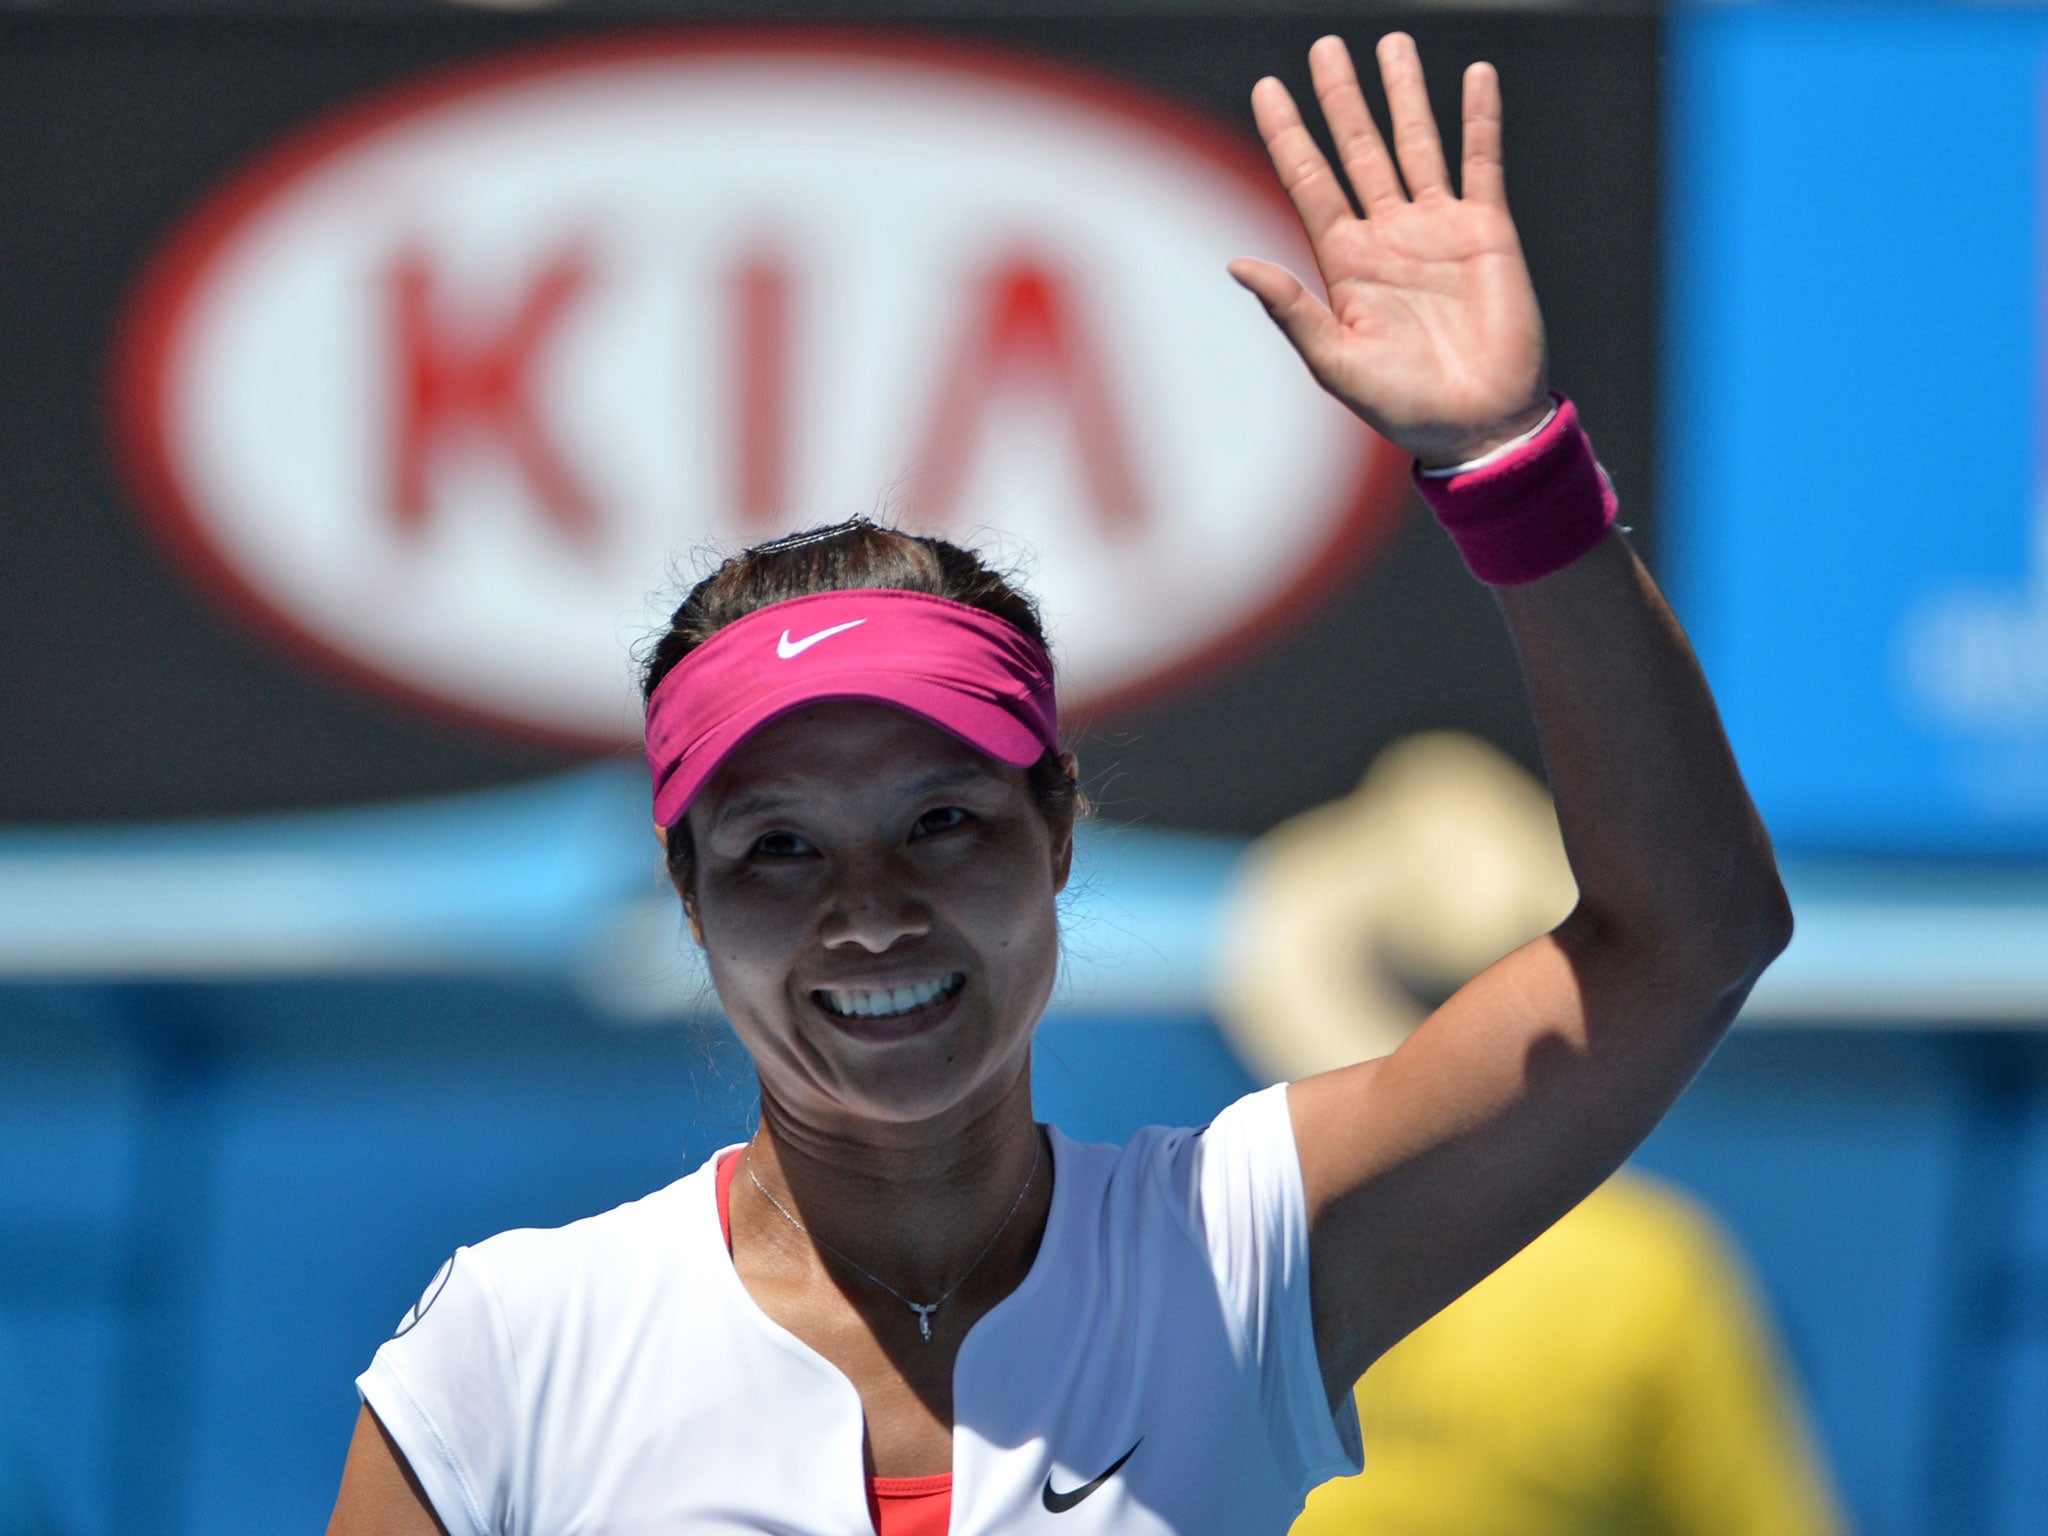 Li Na will compete for her second Grand Slam title in the 2014 Australian Open